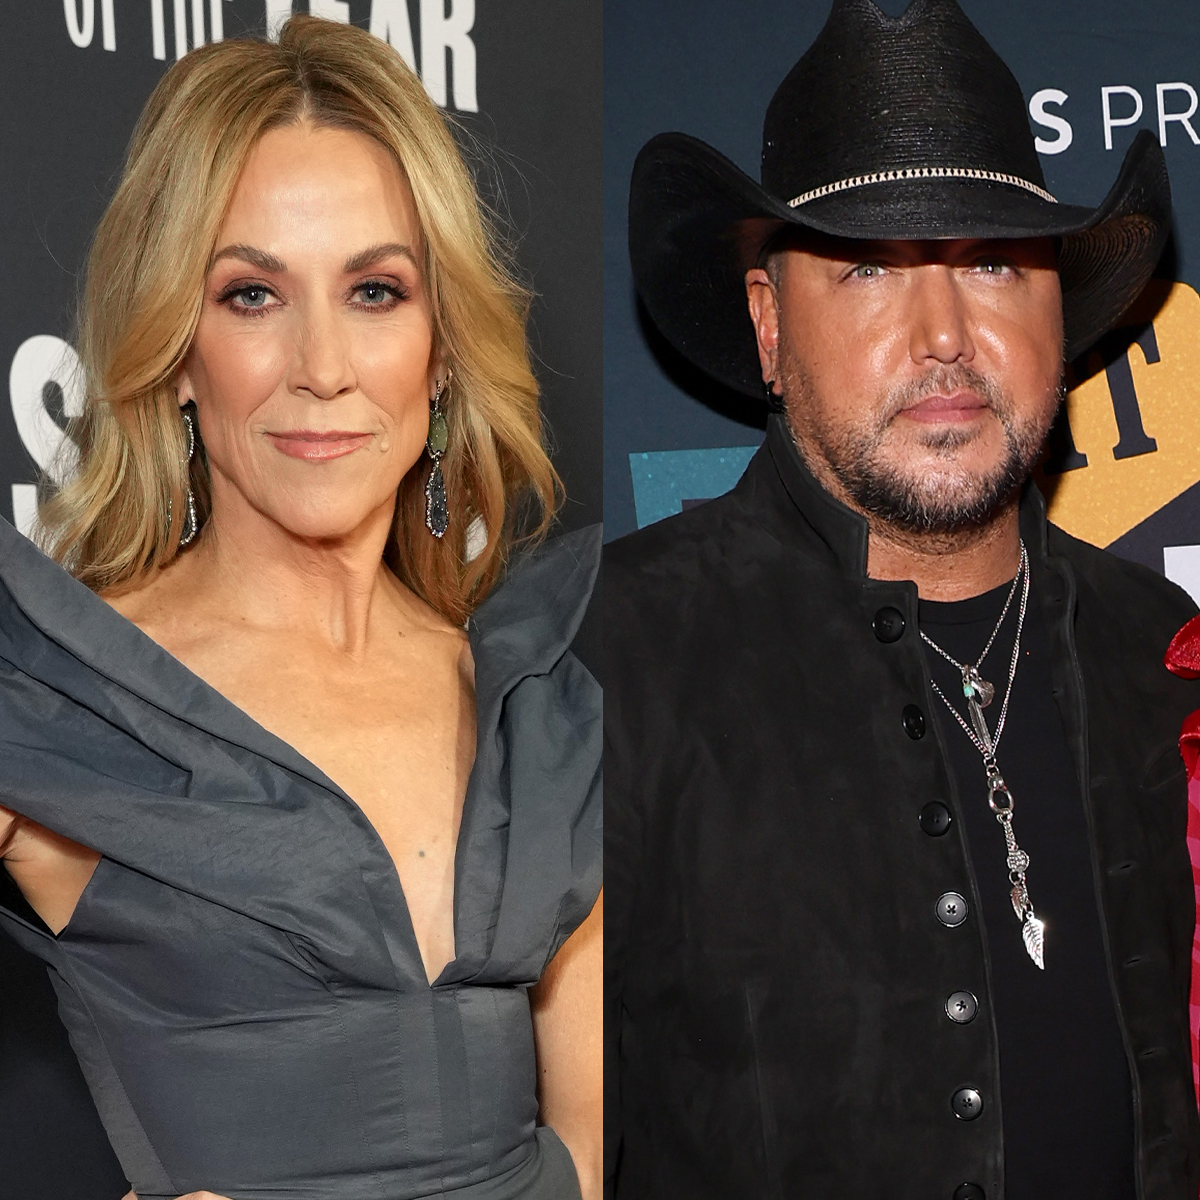 Sheryl Crow Slams Jason Aldean for “Promoting Violence” With New Song